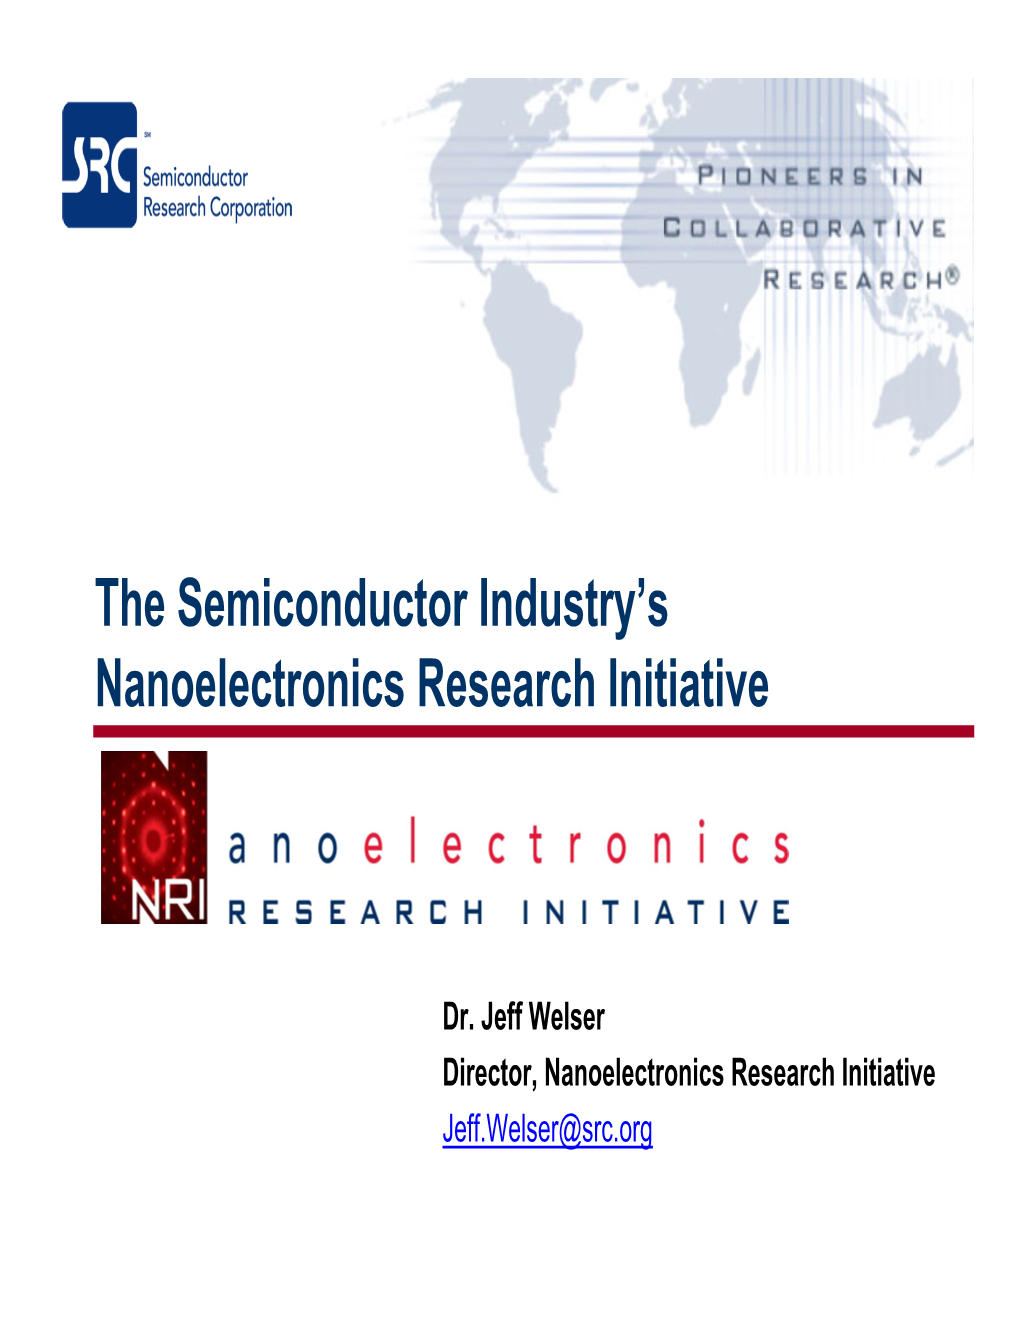 The Semiconductor Industry's Nanoelectronics Research Initiative